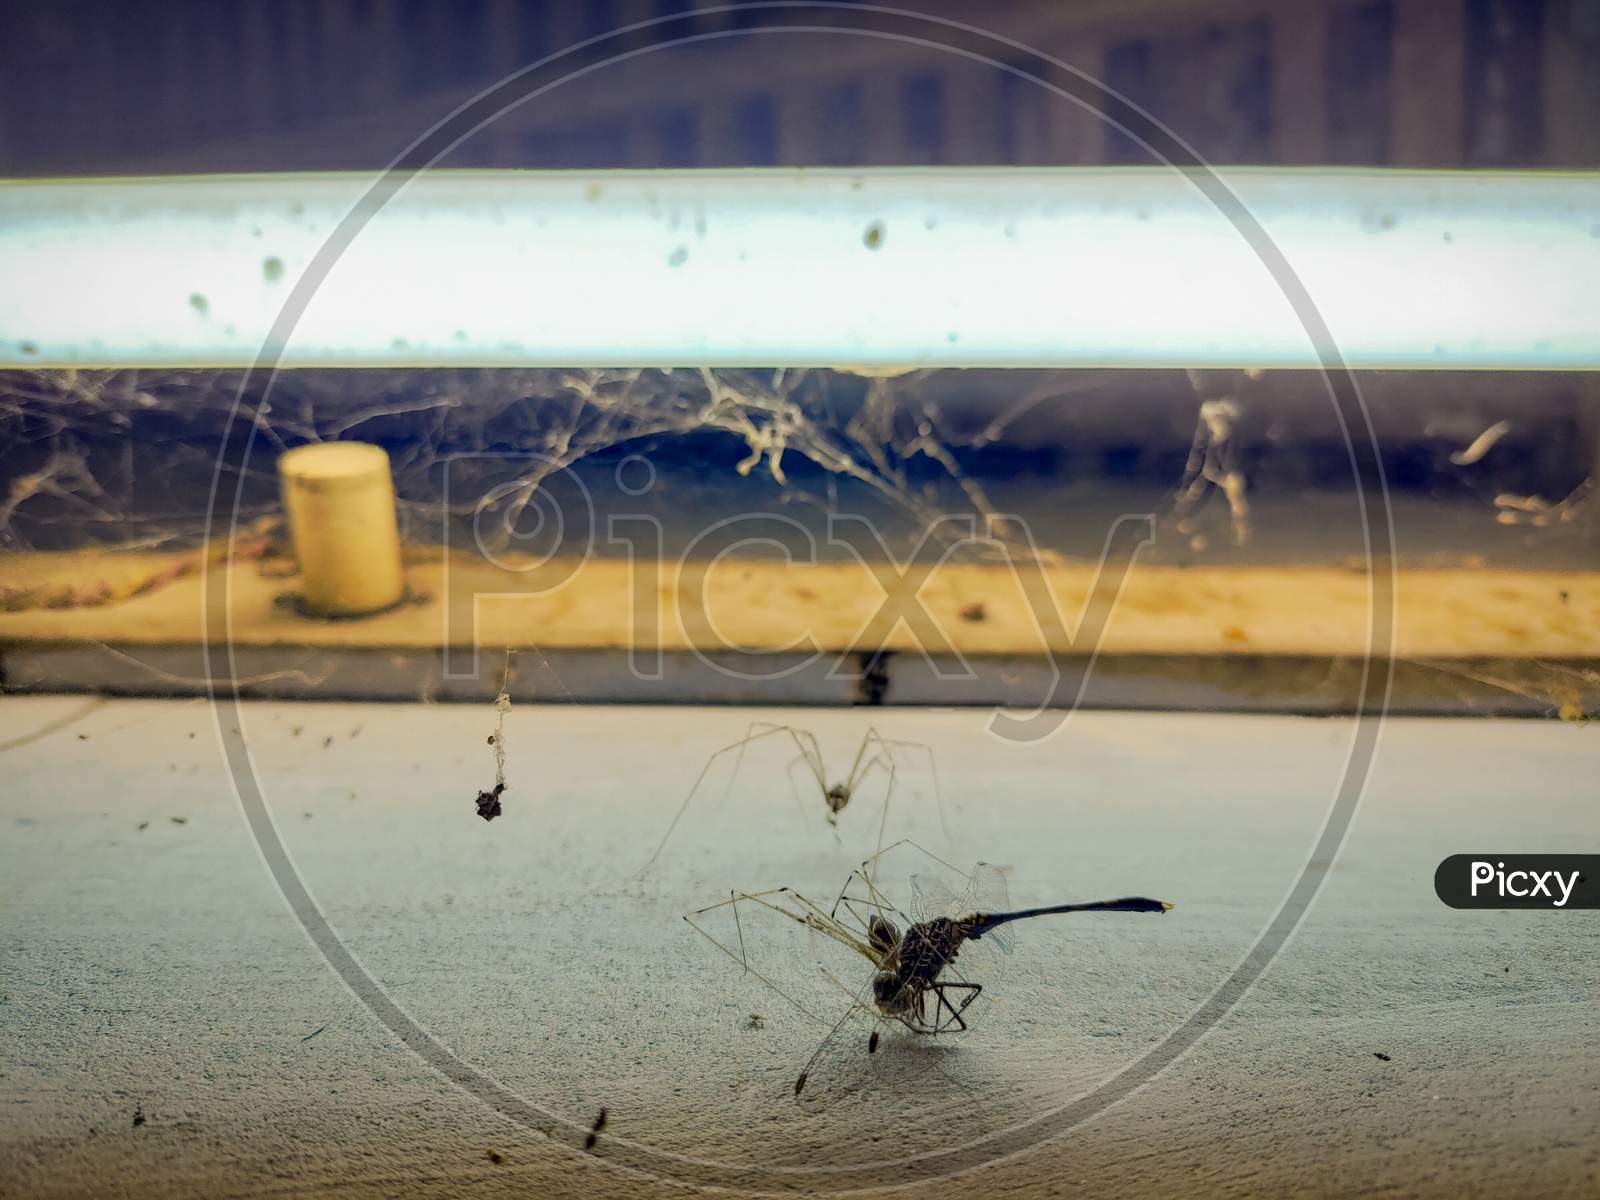 Grasshopper struck in the spider web, background yellow tubelight view